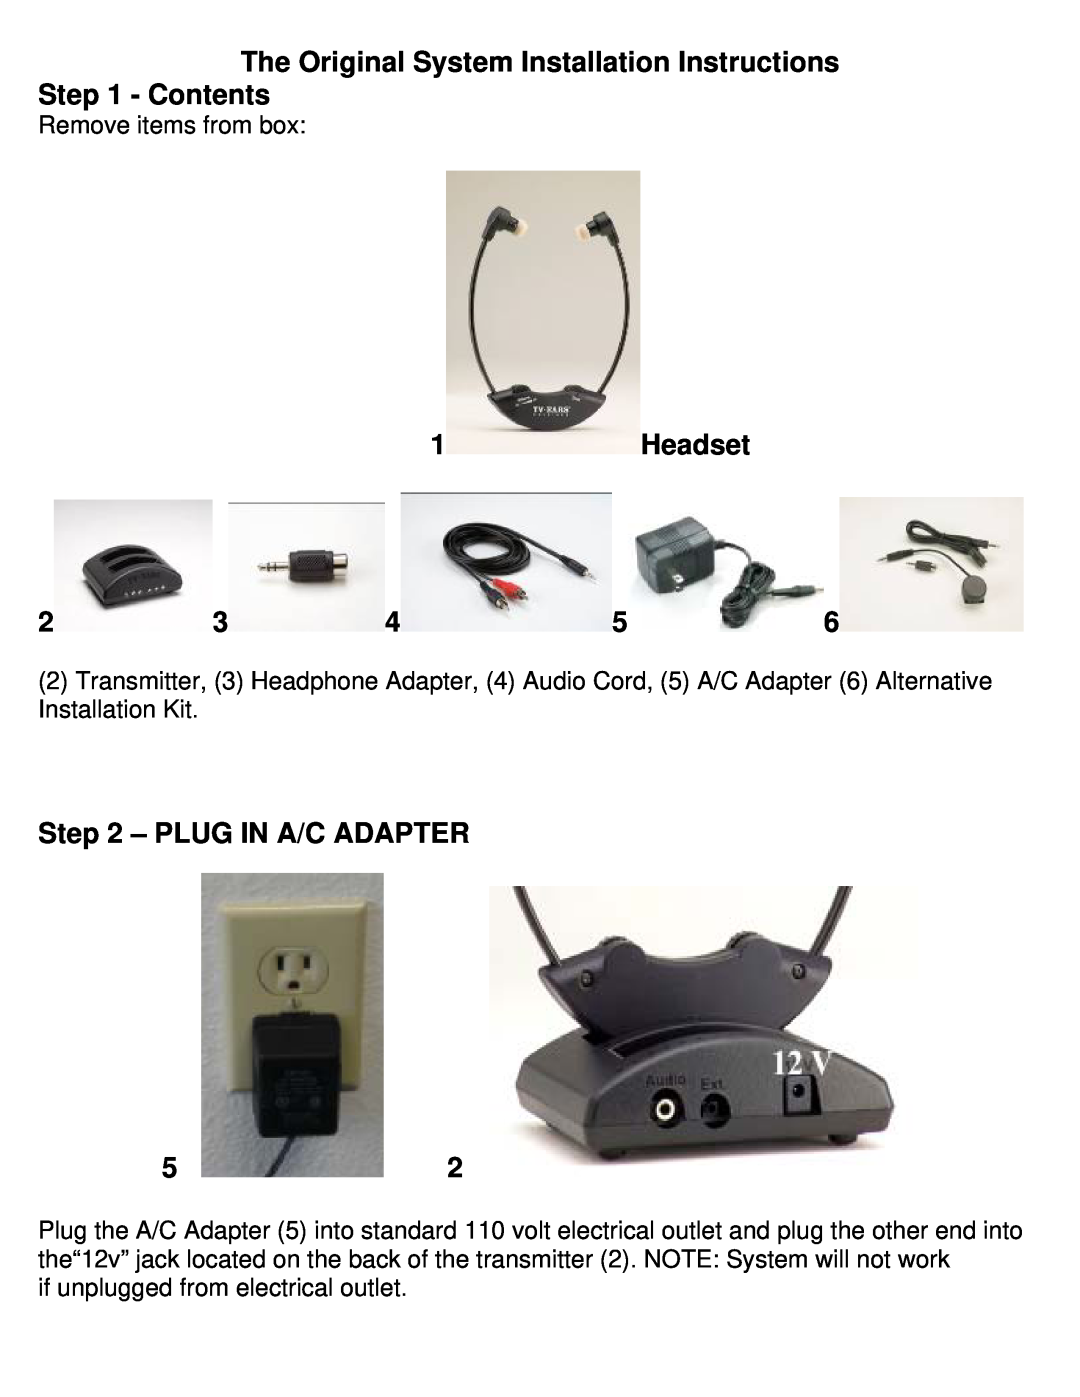 TV Ears Headphone installation instructions 1Headset, Plug In A/C Adapter 